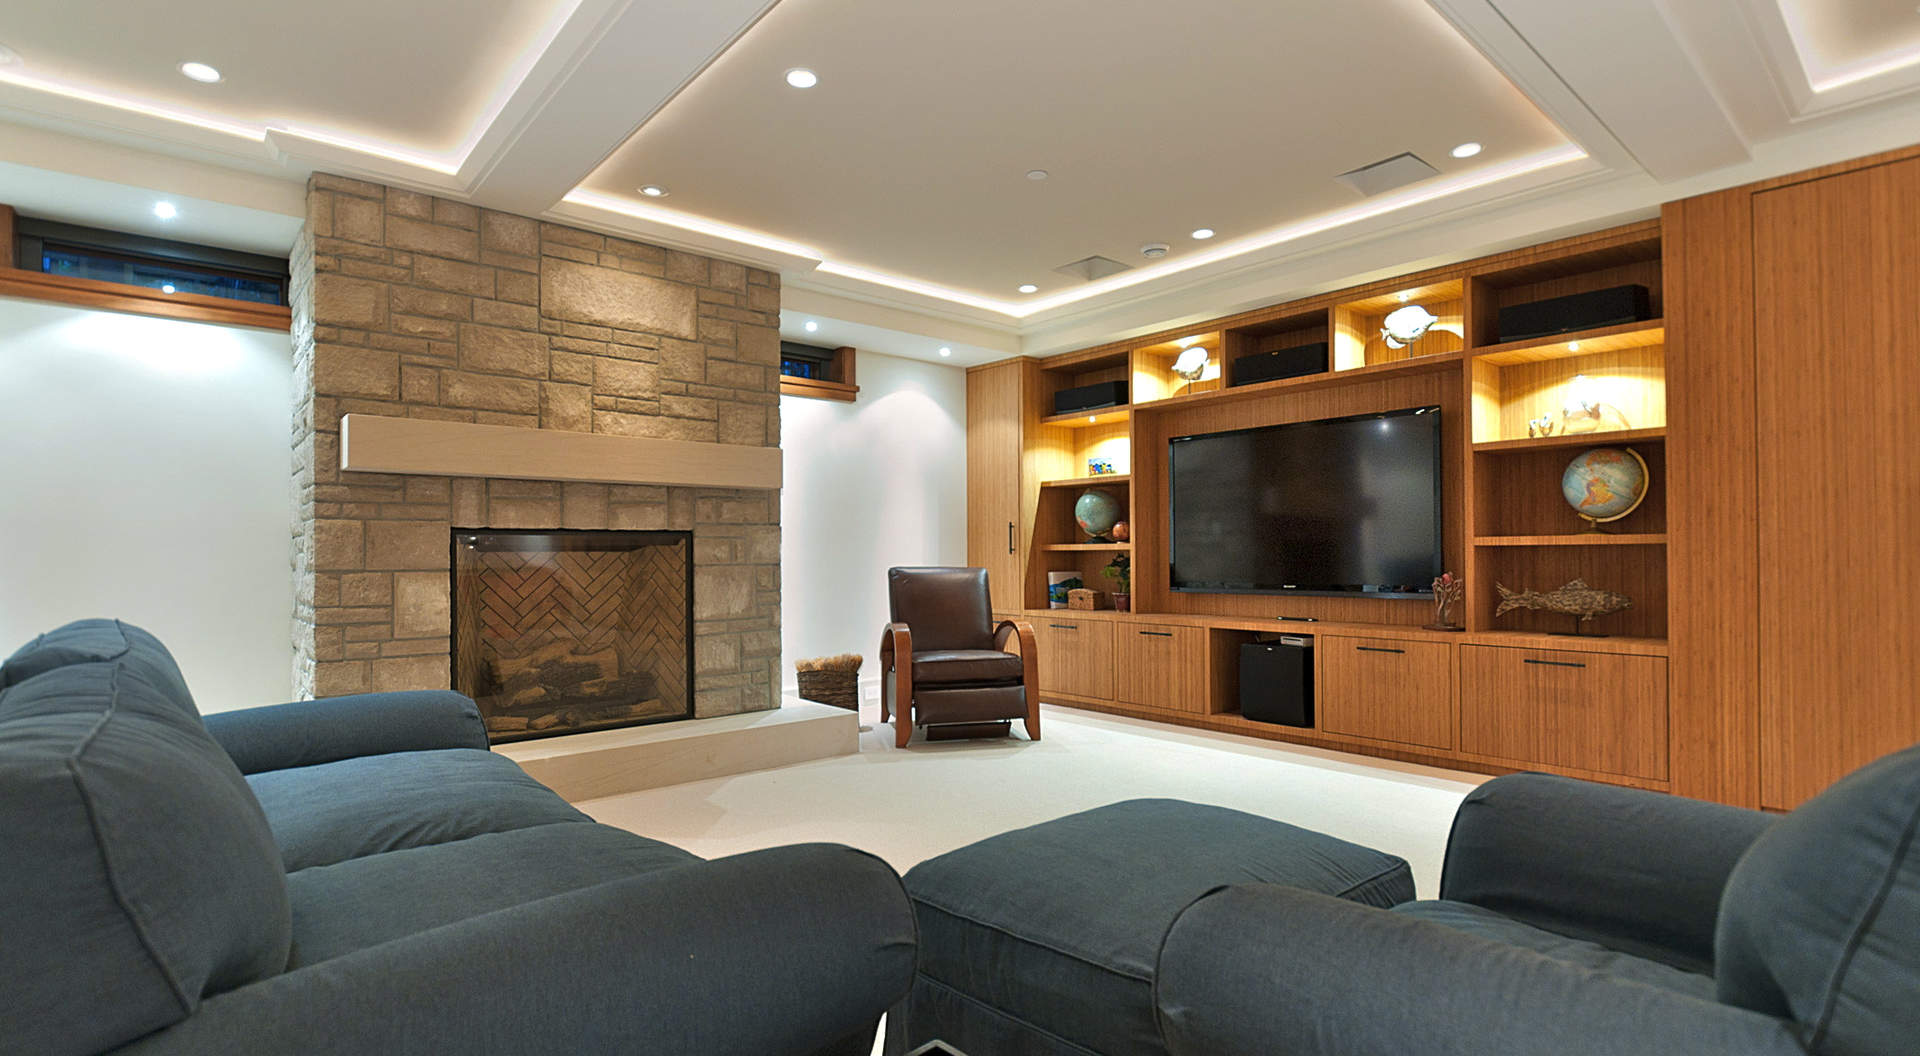 An Amazing Media Room with Fireplace & Custom Cabinetry